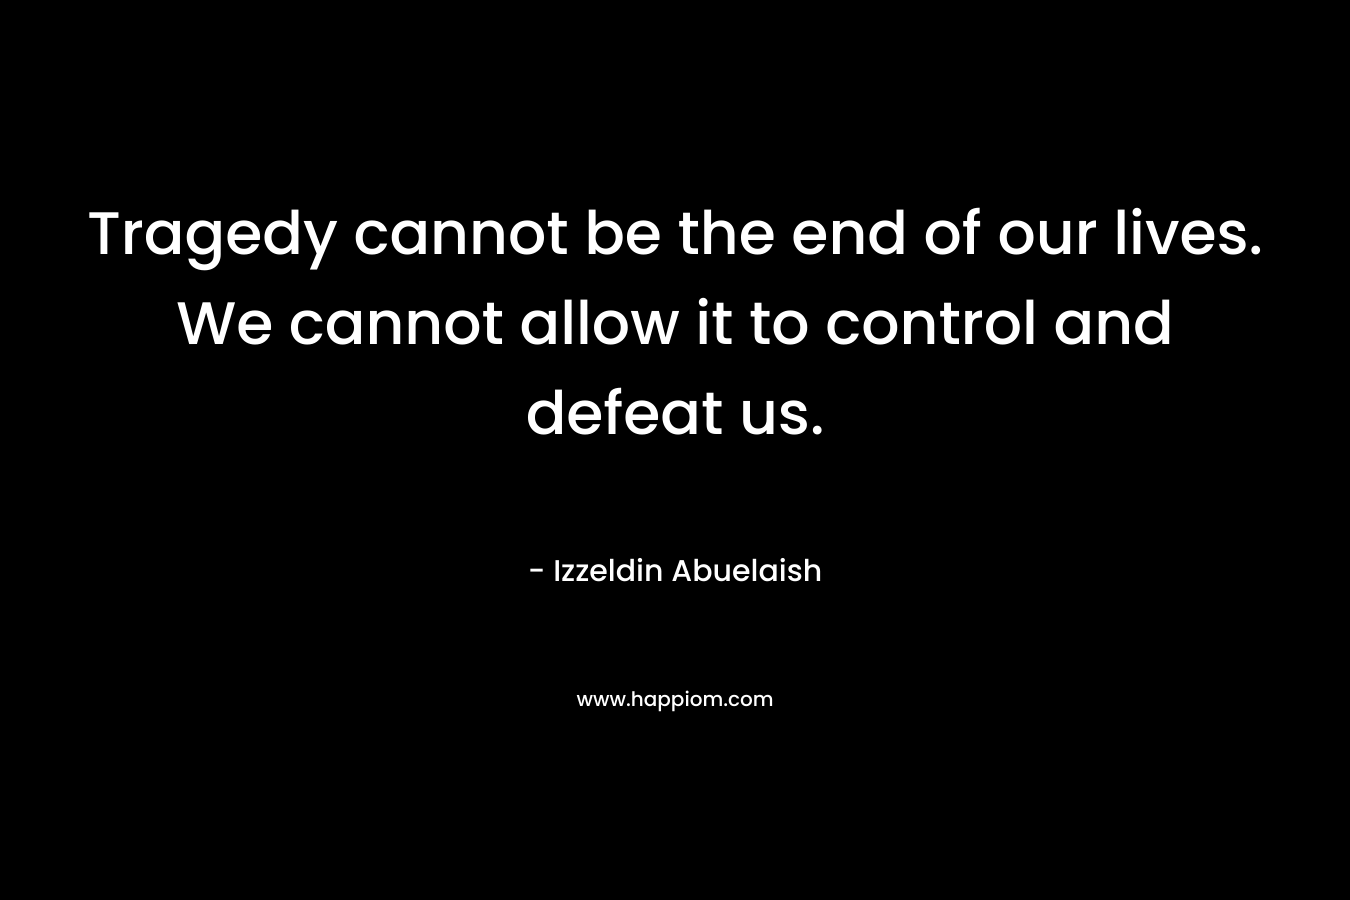 Tragedy cannot be the end of our lives. We cannot allow it to control and defeat us.